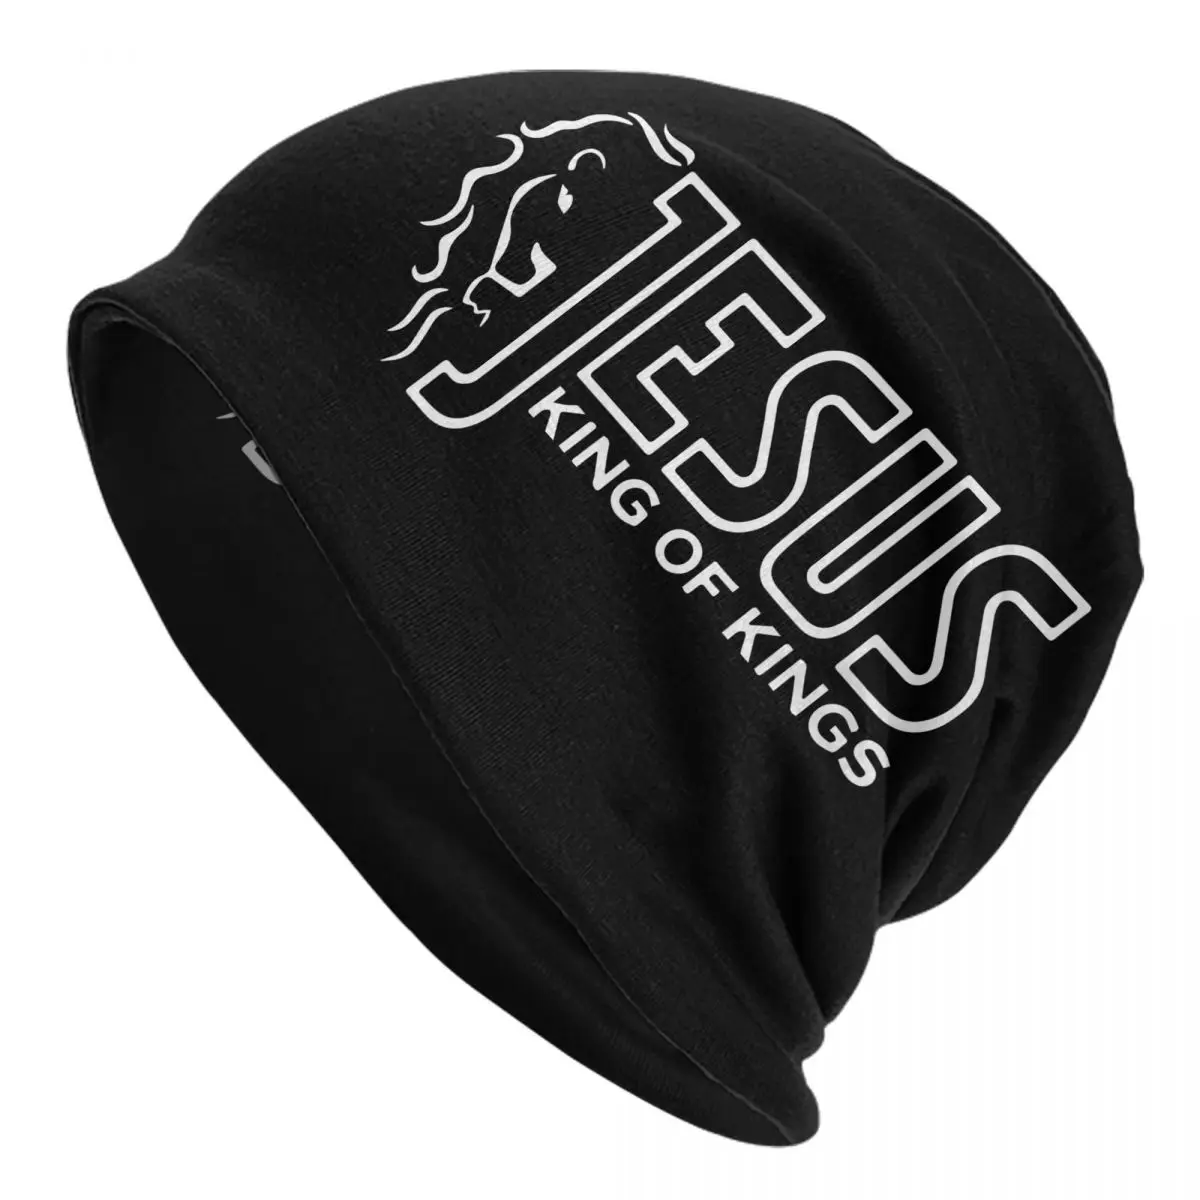 Cheap Graphic Jesus Is King Adult Men's Women's Knit Hat Keep warm winter knitted hat